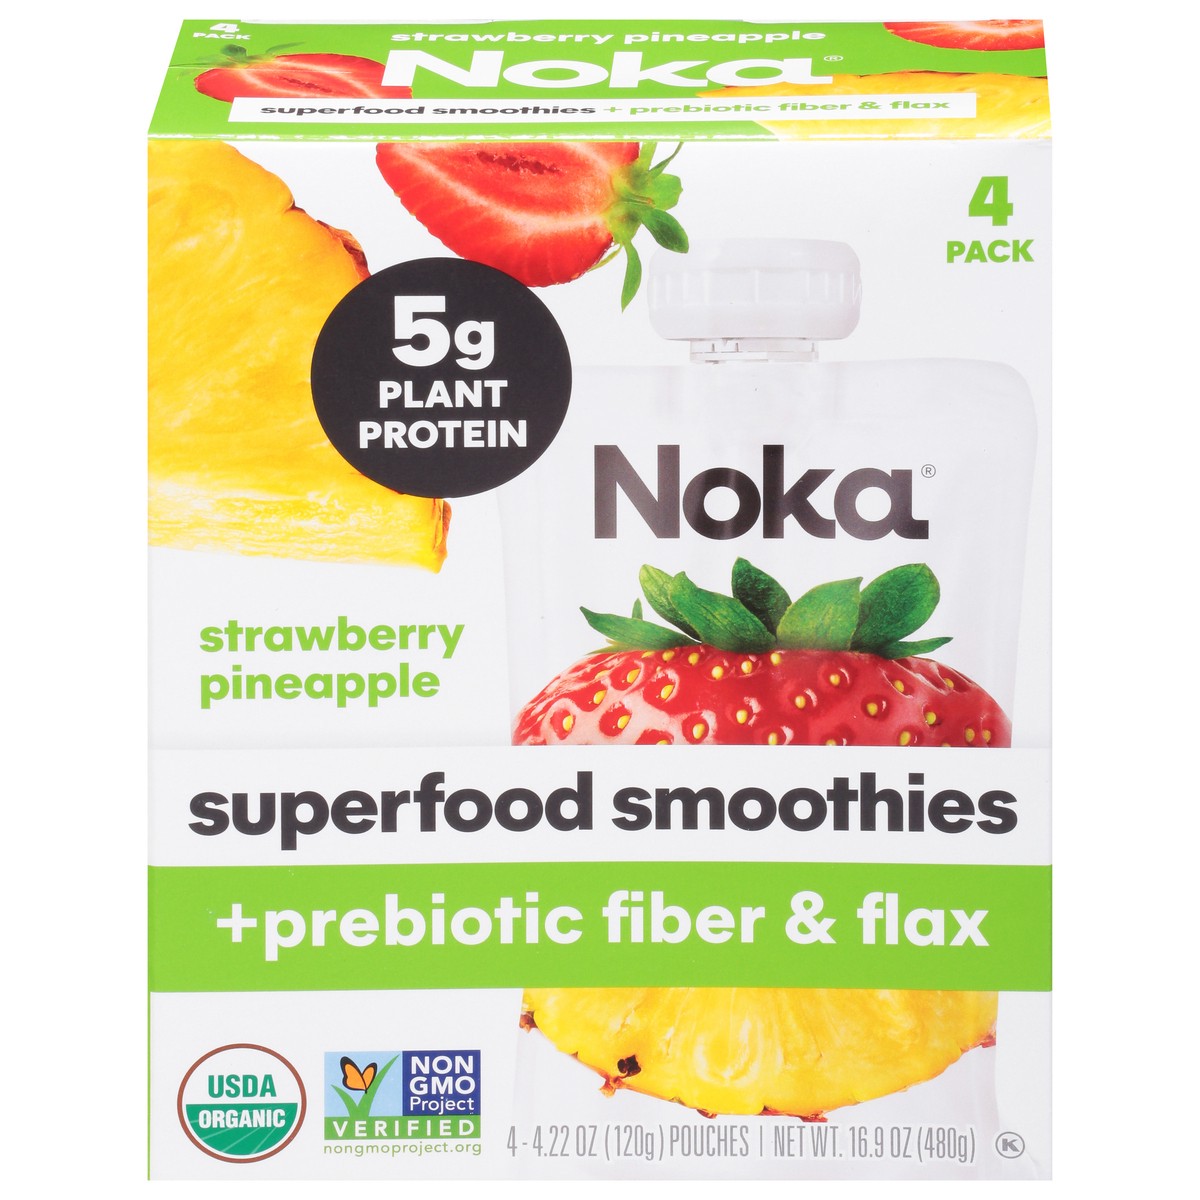 slide 11 of 14, NOKA 4 Pack Strawberry Pineapple Superfood Smoothies 4 - 4.22 oz Pouches, 4 ct